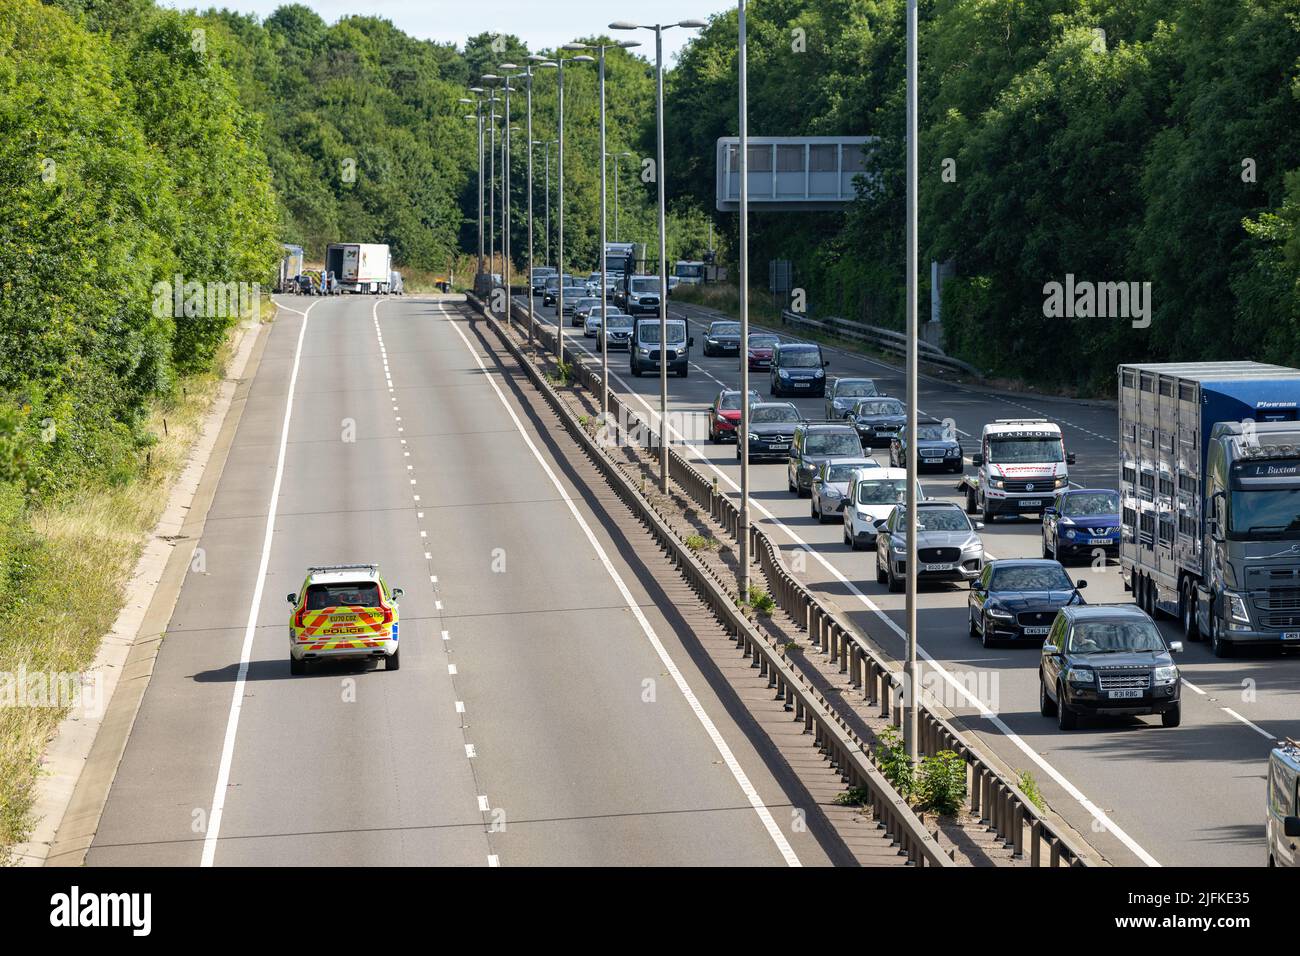 Brentwood, Essex, UK. 4th July 2022 Protesters about fuel prices cause major traffic congestion on the A12 at Brentwood Essex as part of a national protest against fuel price increases Credit: Ian Davidson/Alamy Live News Stock Photo